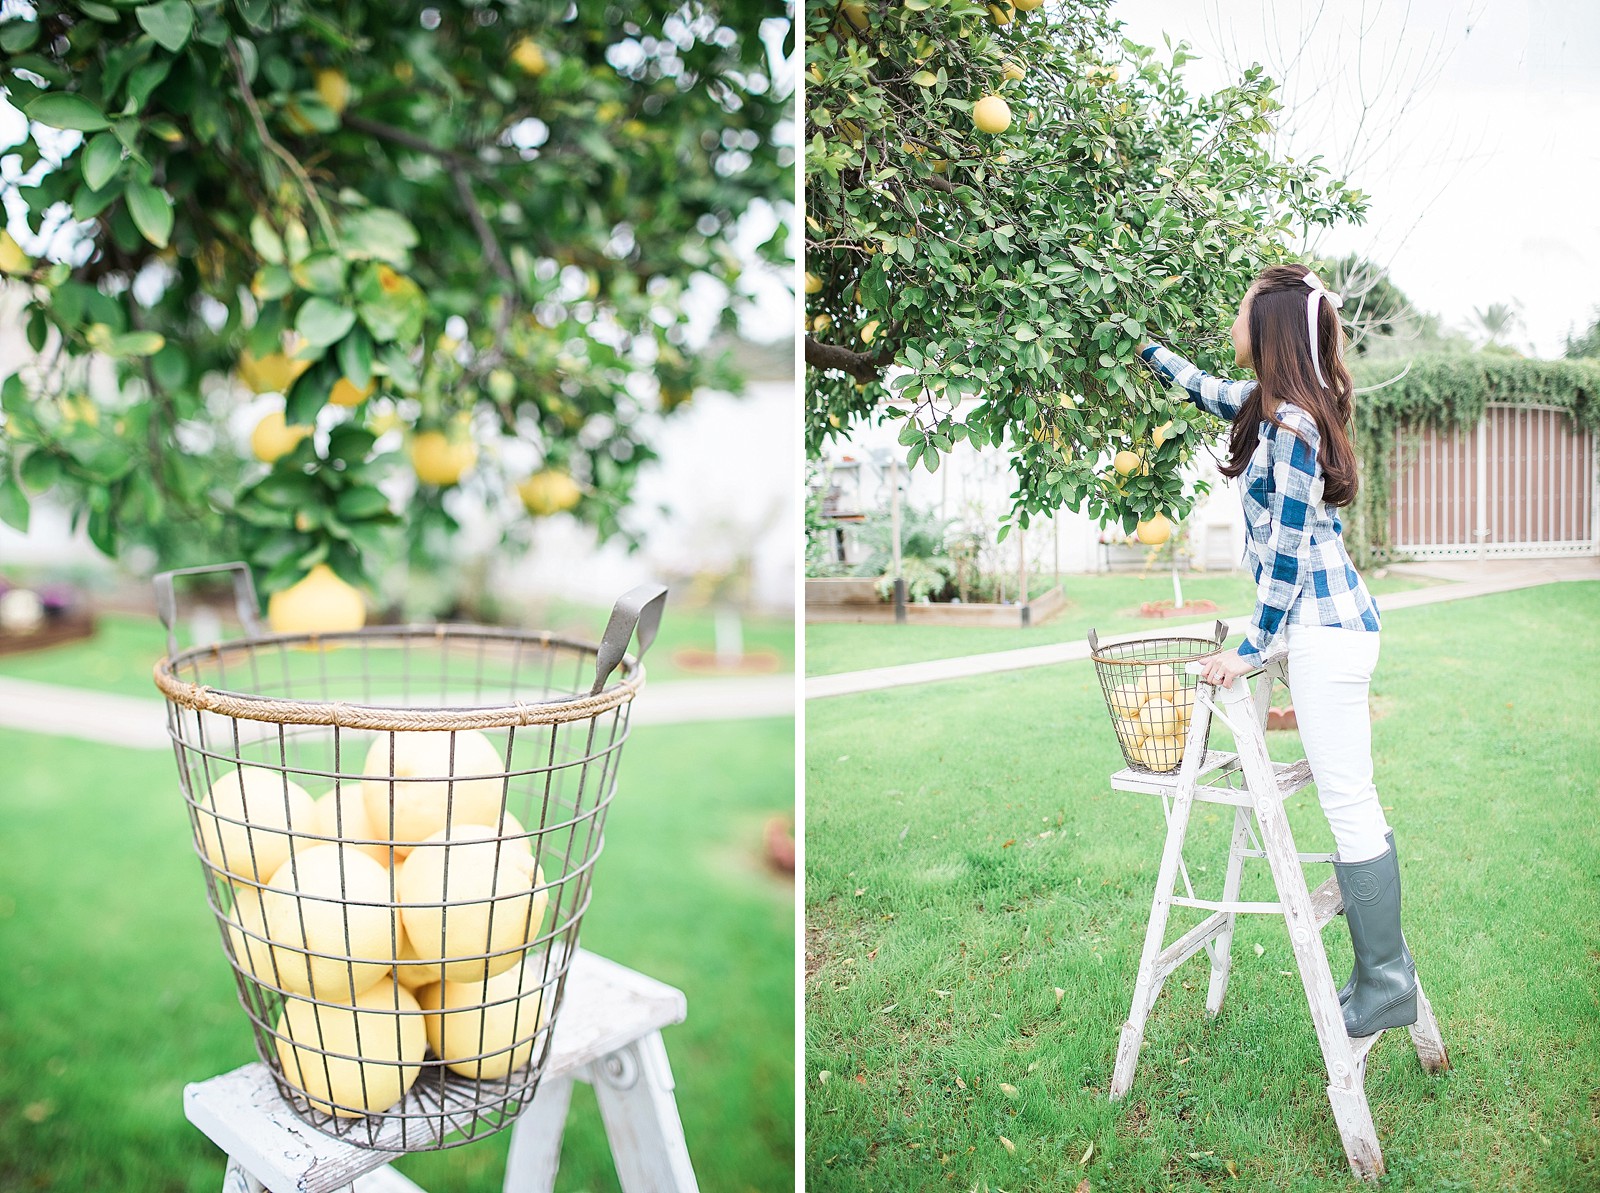 cloth and stone gingham button-back top anthropologie grapefruit picking fashion blogger phoenix lifestyle blogger hunter wedges wedge boots